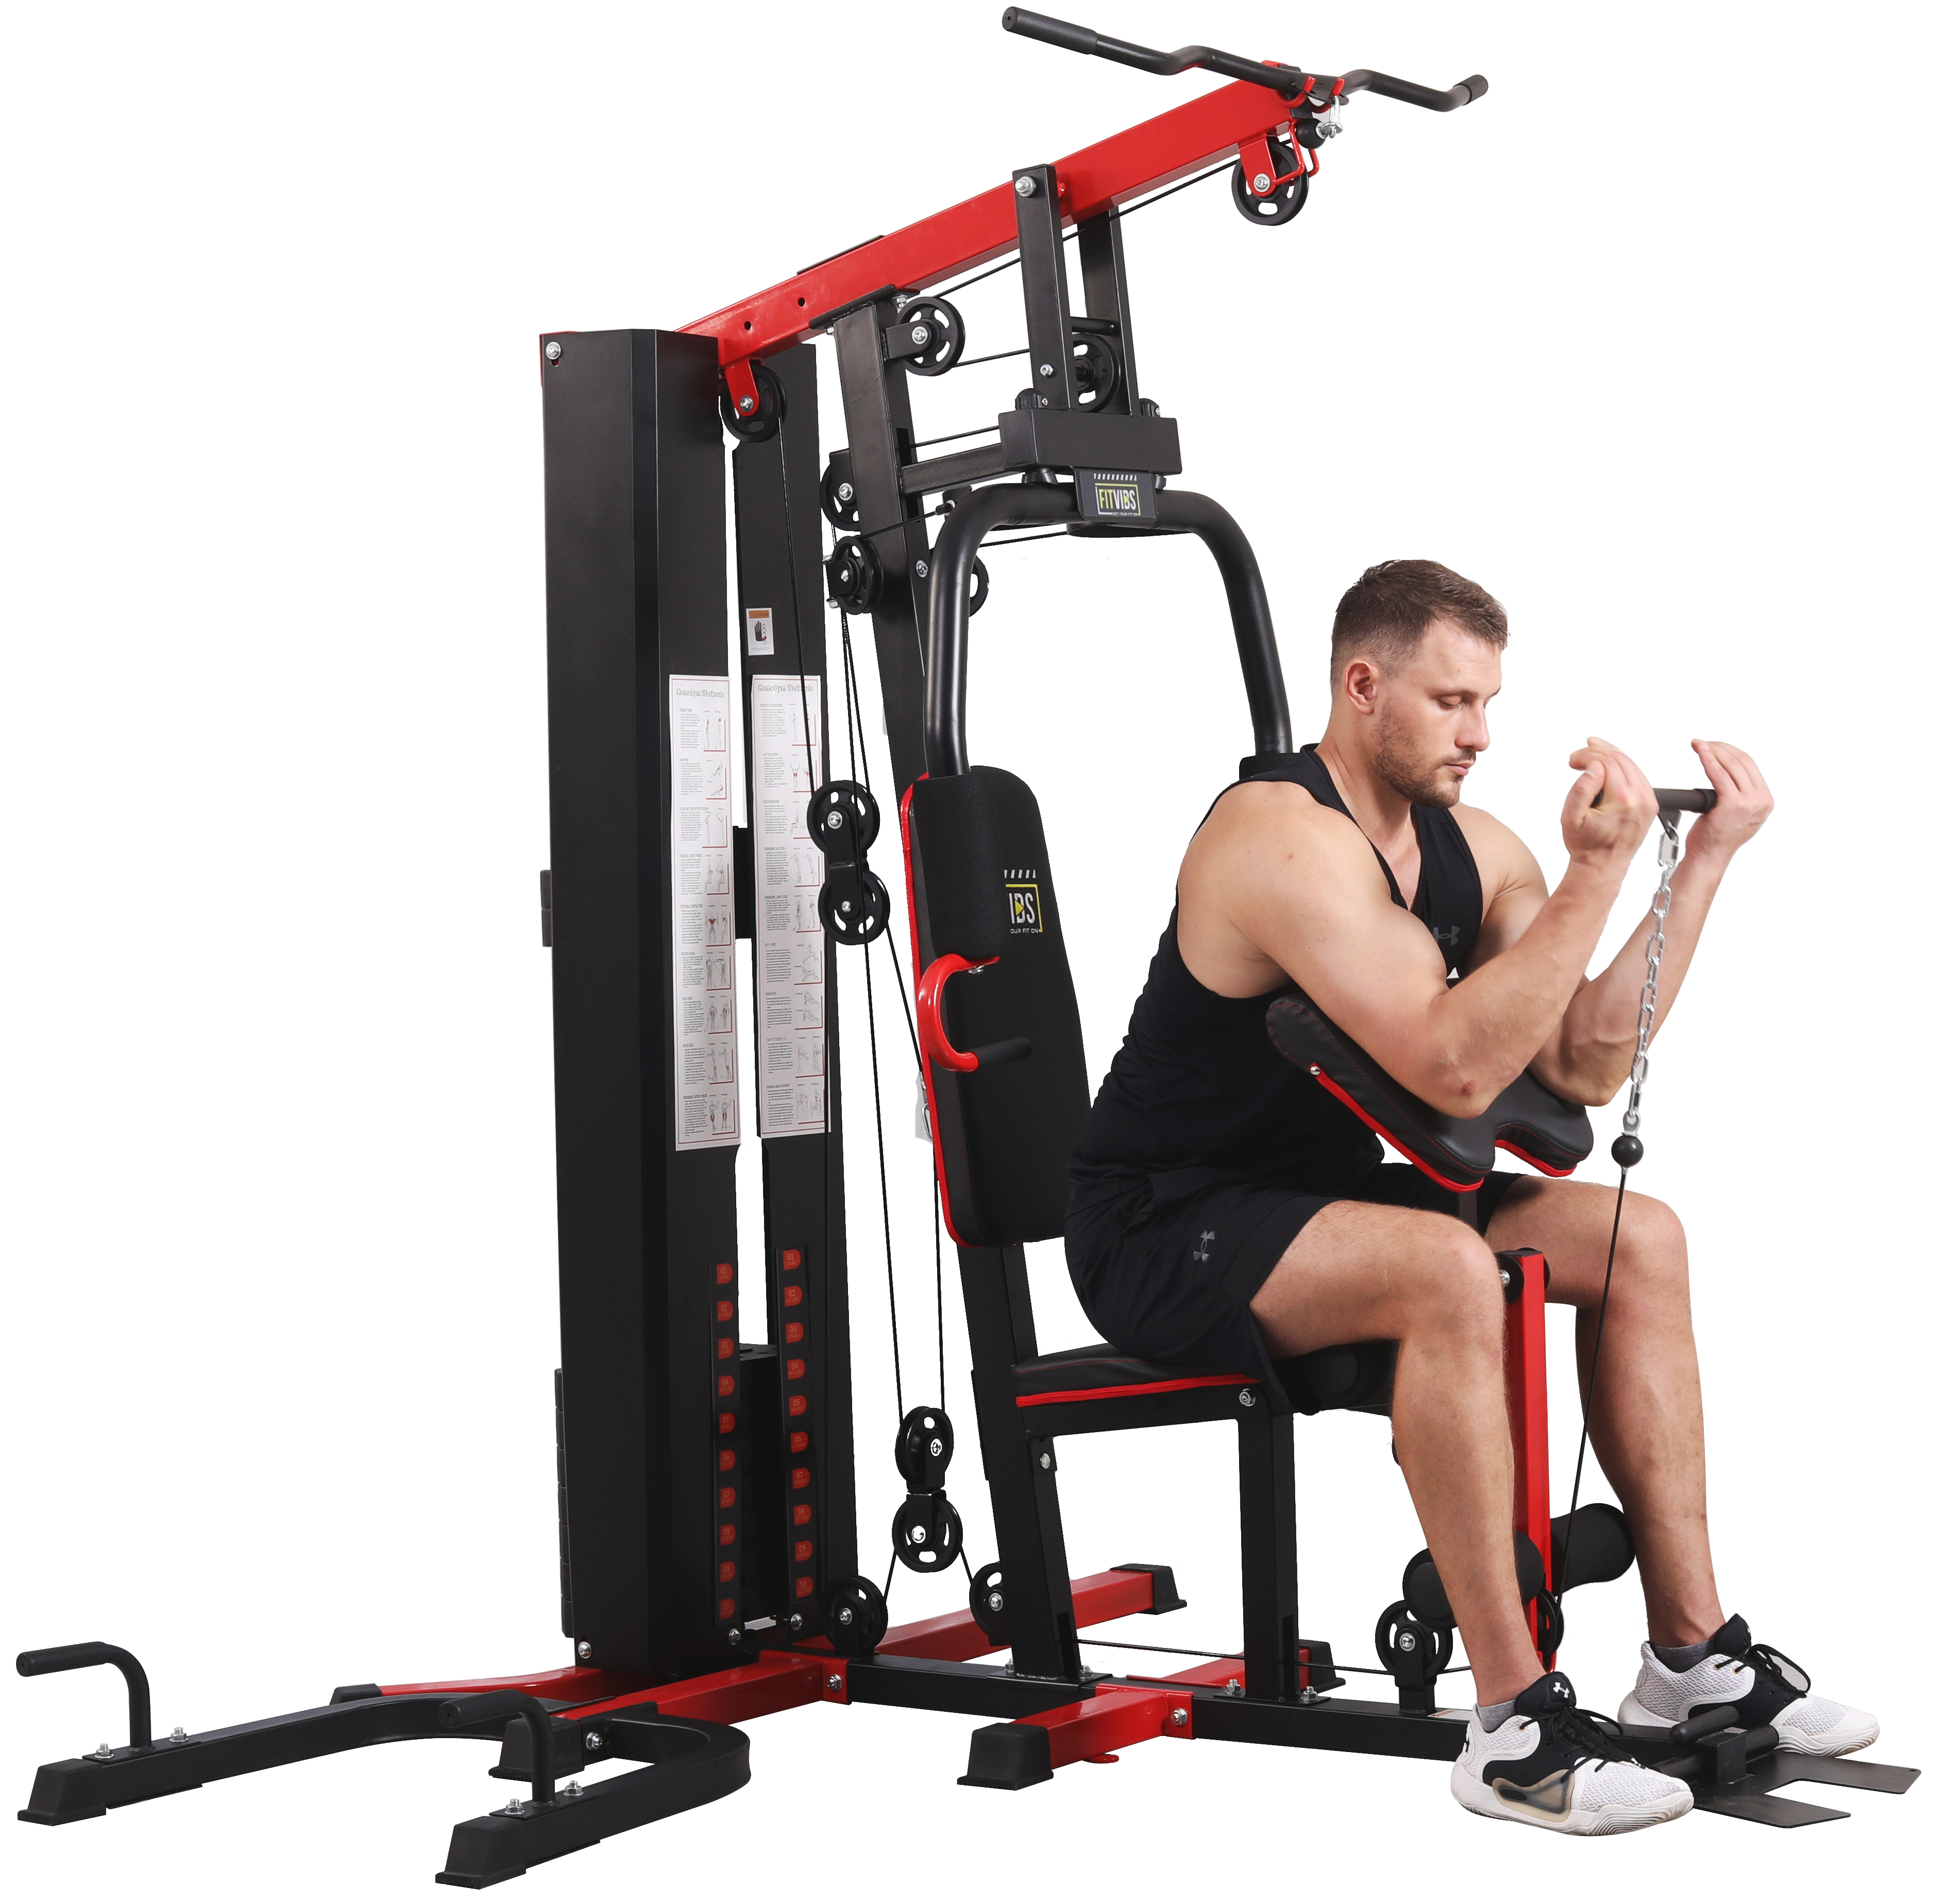 Fitvids LX800 Home Gym System Workout Station with 330 Lbs of Resistance, 122.5 Lbs Weight Stack, Two Station, Comes with Installation Instruction Video, Ships in 6 Boxes - image 5 of 13